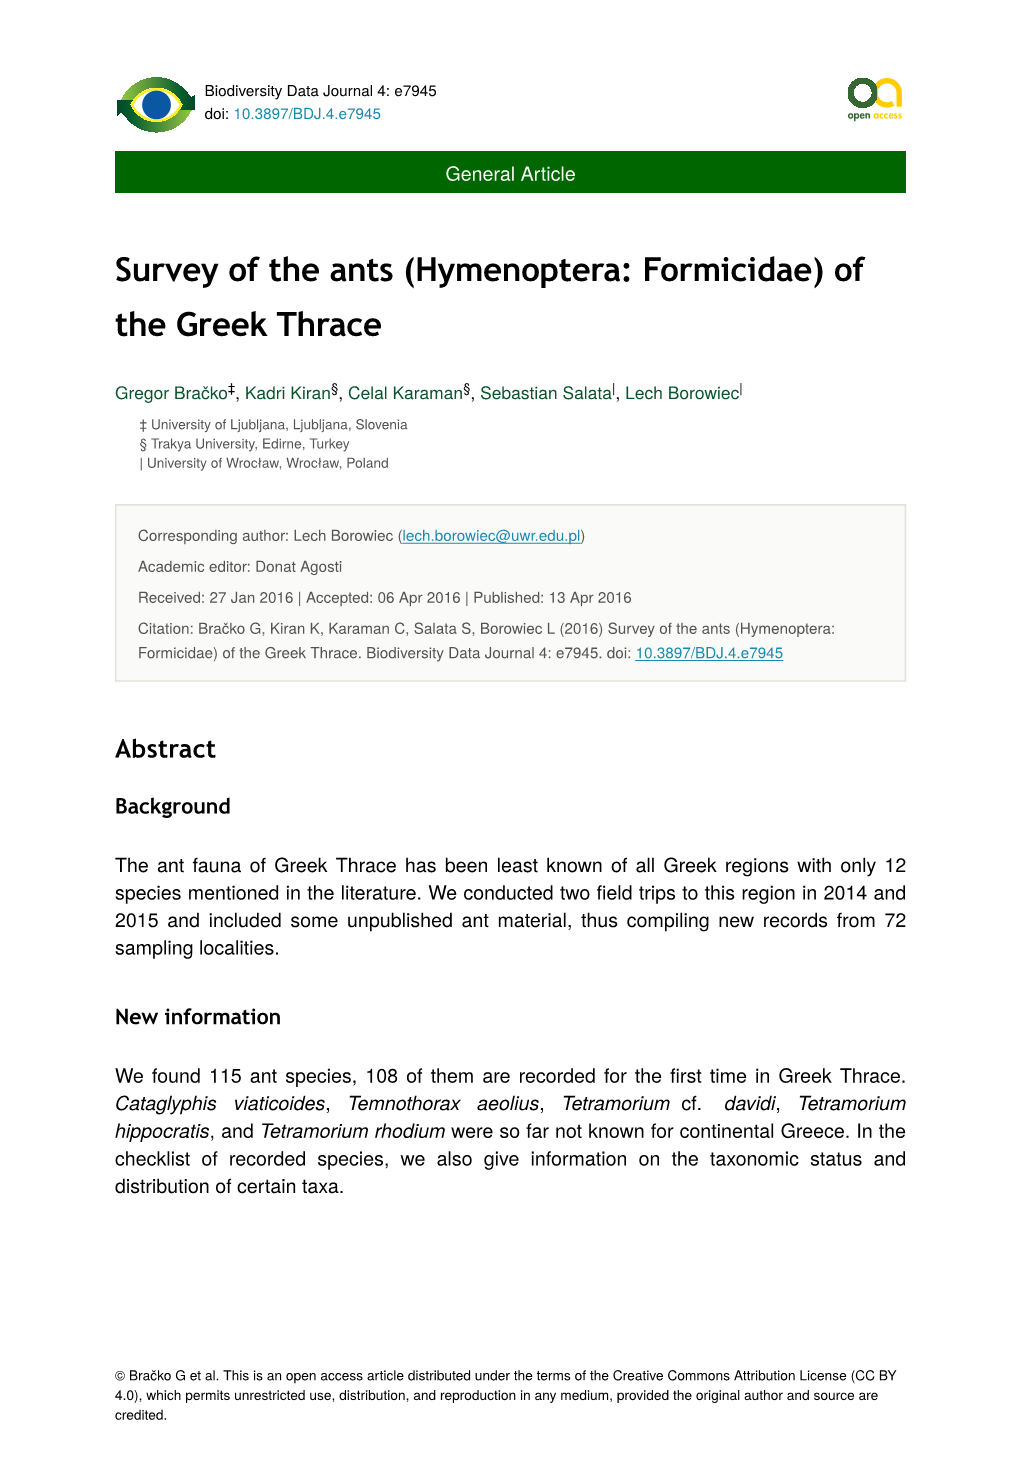 (Hymenoptera: Formicidae) of the Greek Thrace